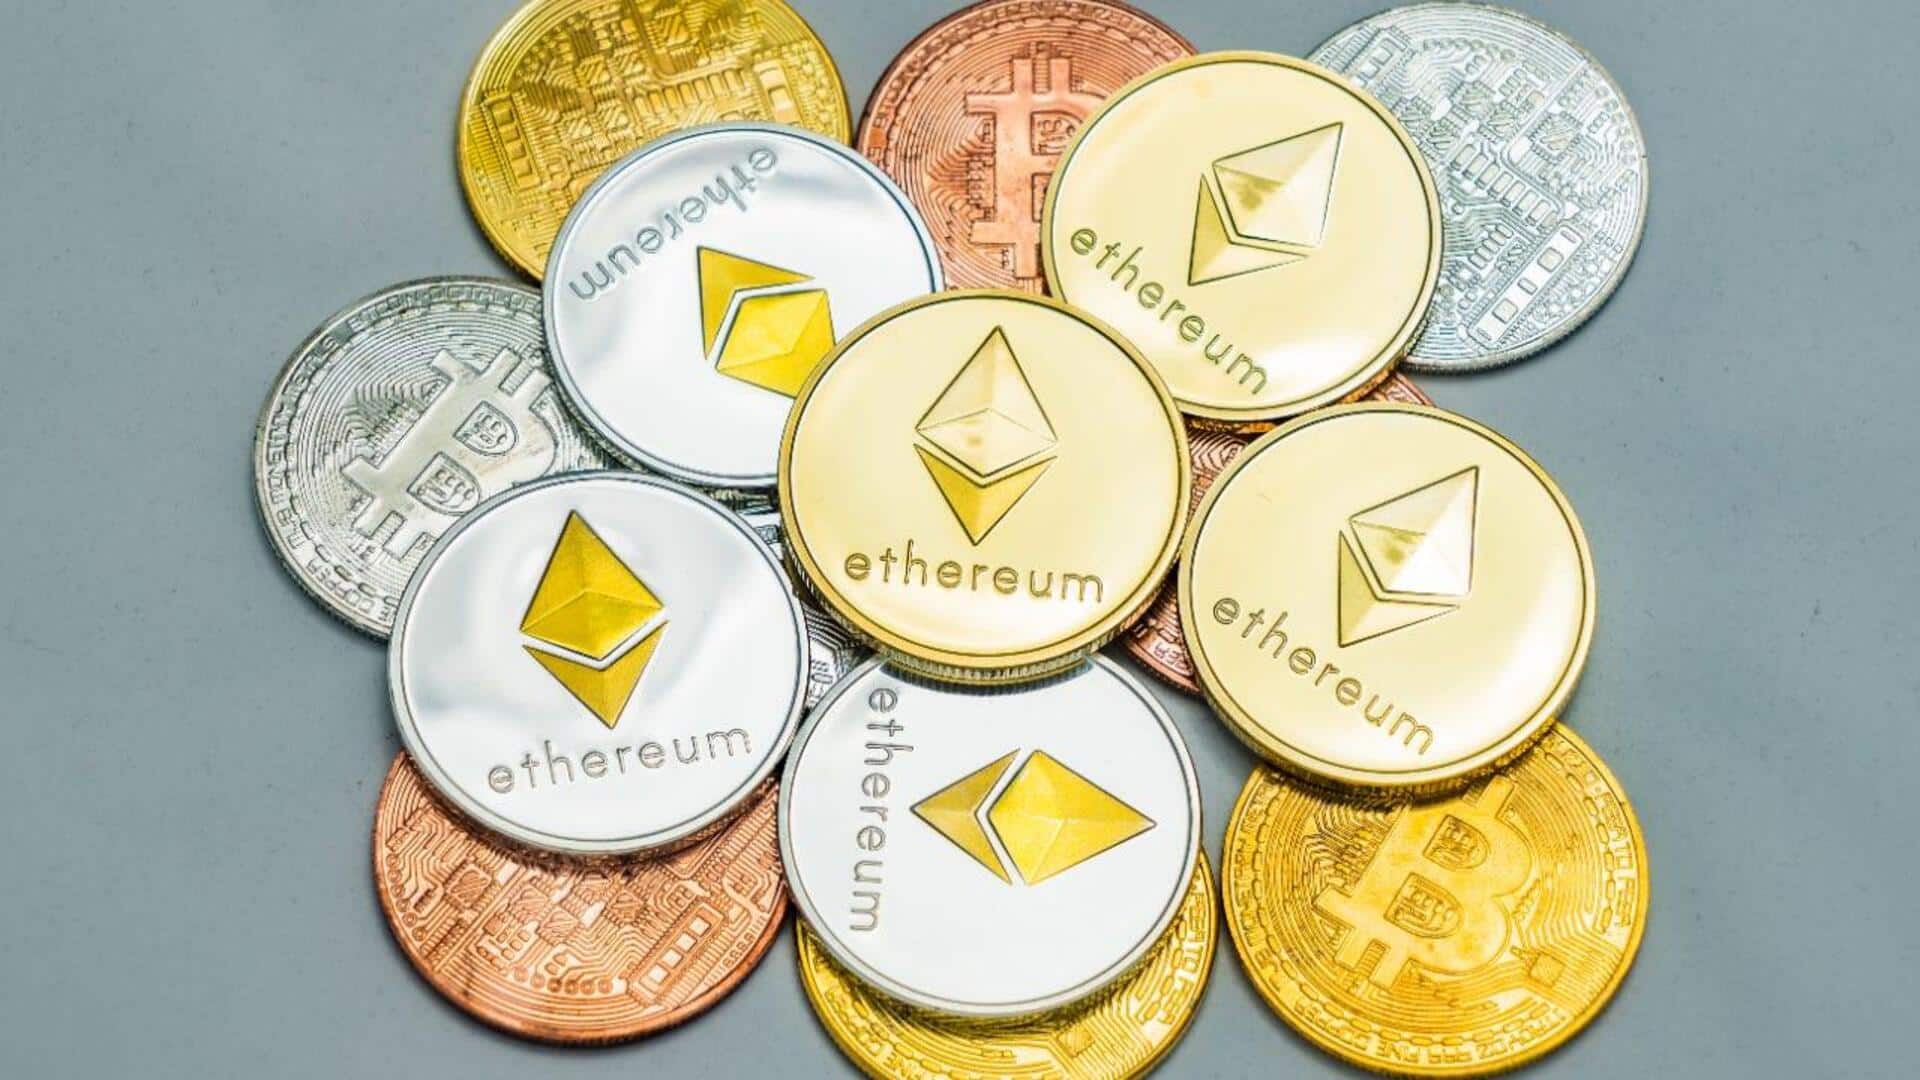 Today's cryptocurrency prices: Check Dogecoin, Tether, Bitcoin and Ethereum rates